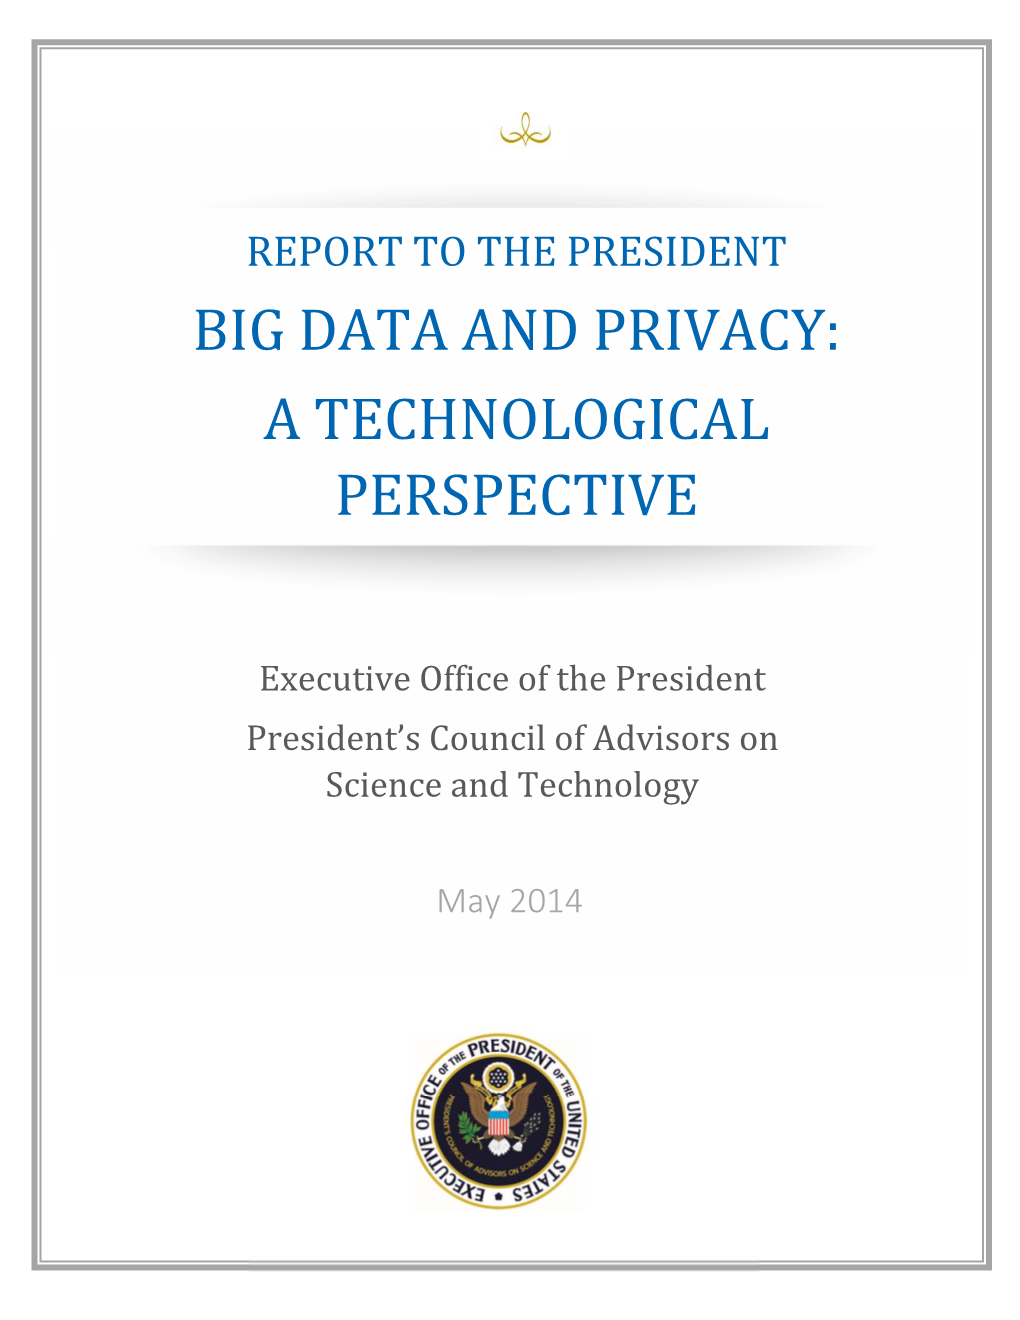 PCAST Report on Big Data and Privacy: a Technological Perspective